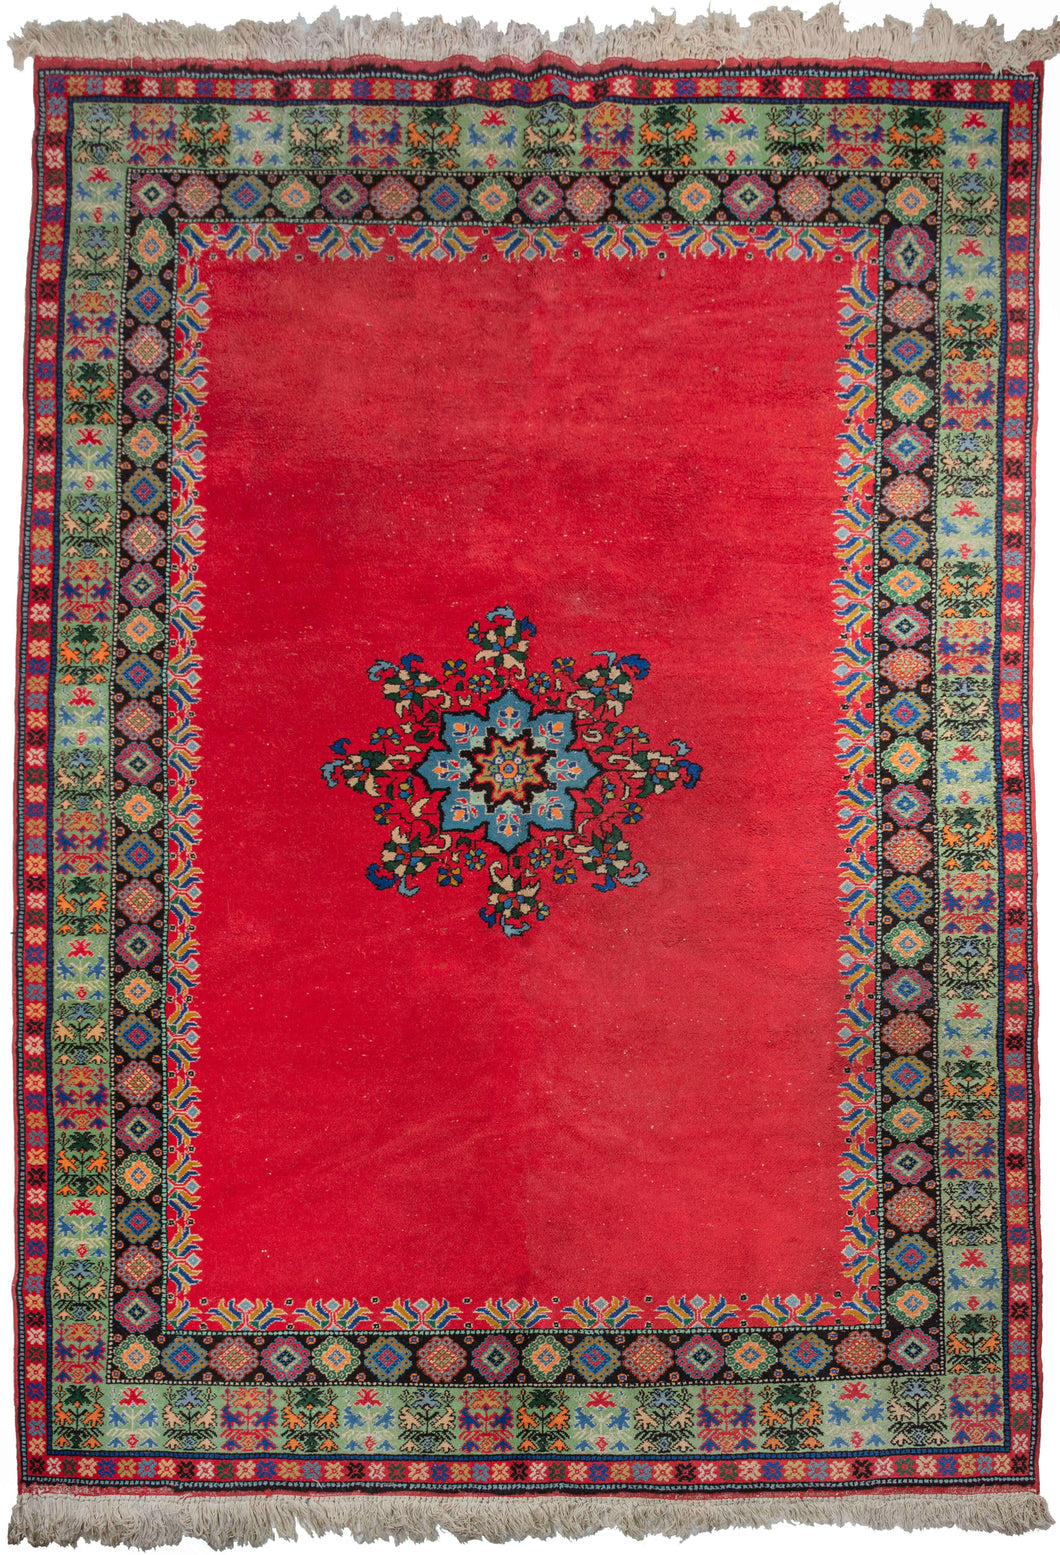 Midcentury Moroccan Rabat area rug featuring a bright and expansive candy apple red field unadorned except for a turquoise central medallion and rows of small tulips around the perimeter.  The main border features abstracted flower bouquets in vases on minty green ground and is flanked by two minor borders. Blacks, blues, green, yellow, and hints of orange add zest and diversity to the whole.